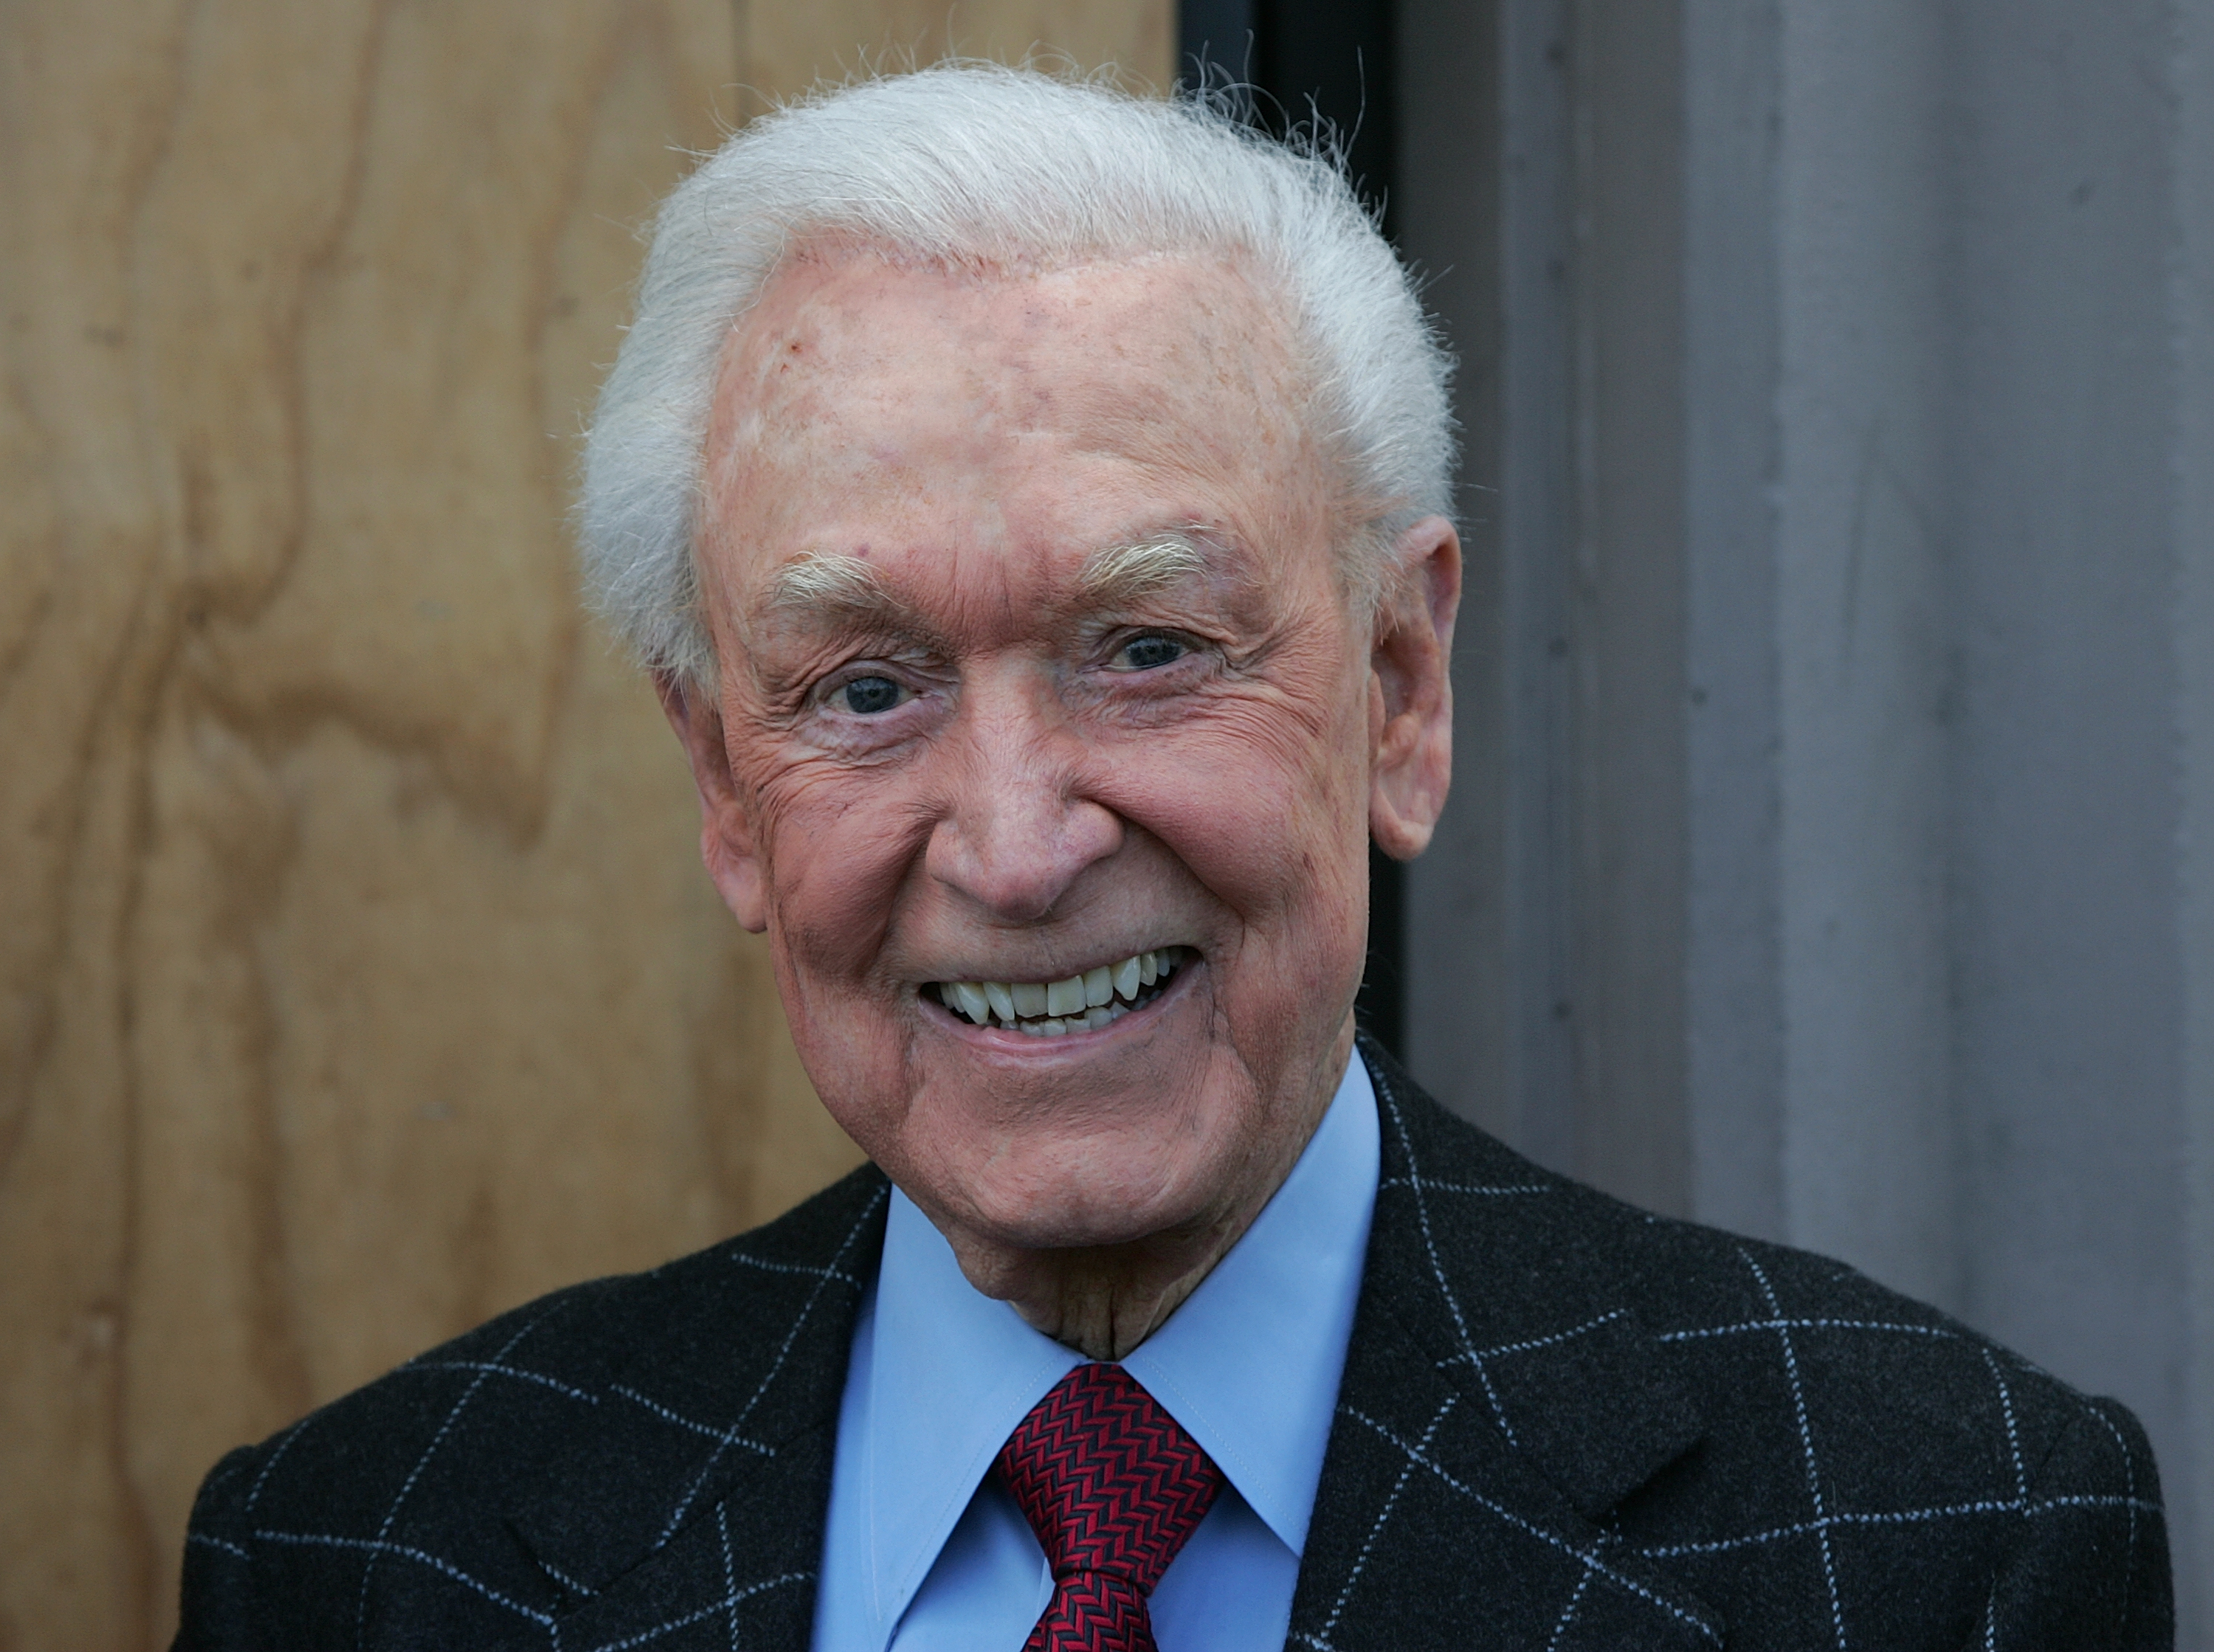 Bob Barker at the dedication ceremony for PETA's Los Angeles office "The Bob Barker Building" in 2010 | Source: Getty Images